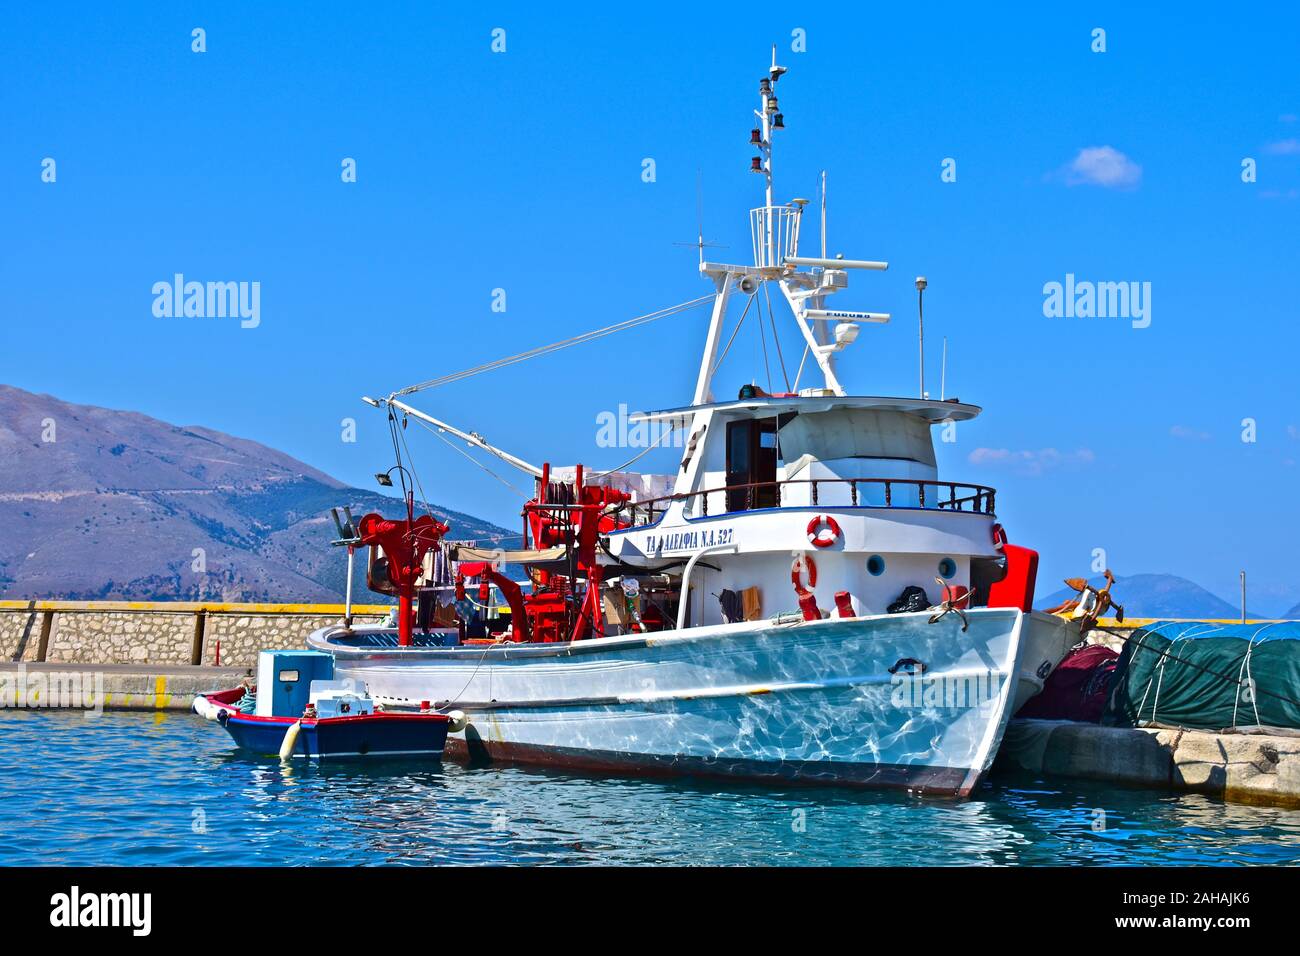 https://c8.alamy.com/comp/2AHAJK6/modern-greek-fishing-boat-moored-in-the-harbour-of-the-beautiful-coastal-town-of-sami-with-a-spectacular-backdrop-of-mountains-blue-sky-sea-2AHAJK6.jpg